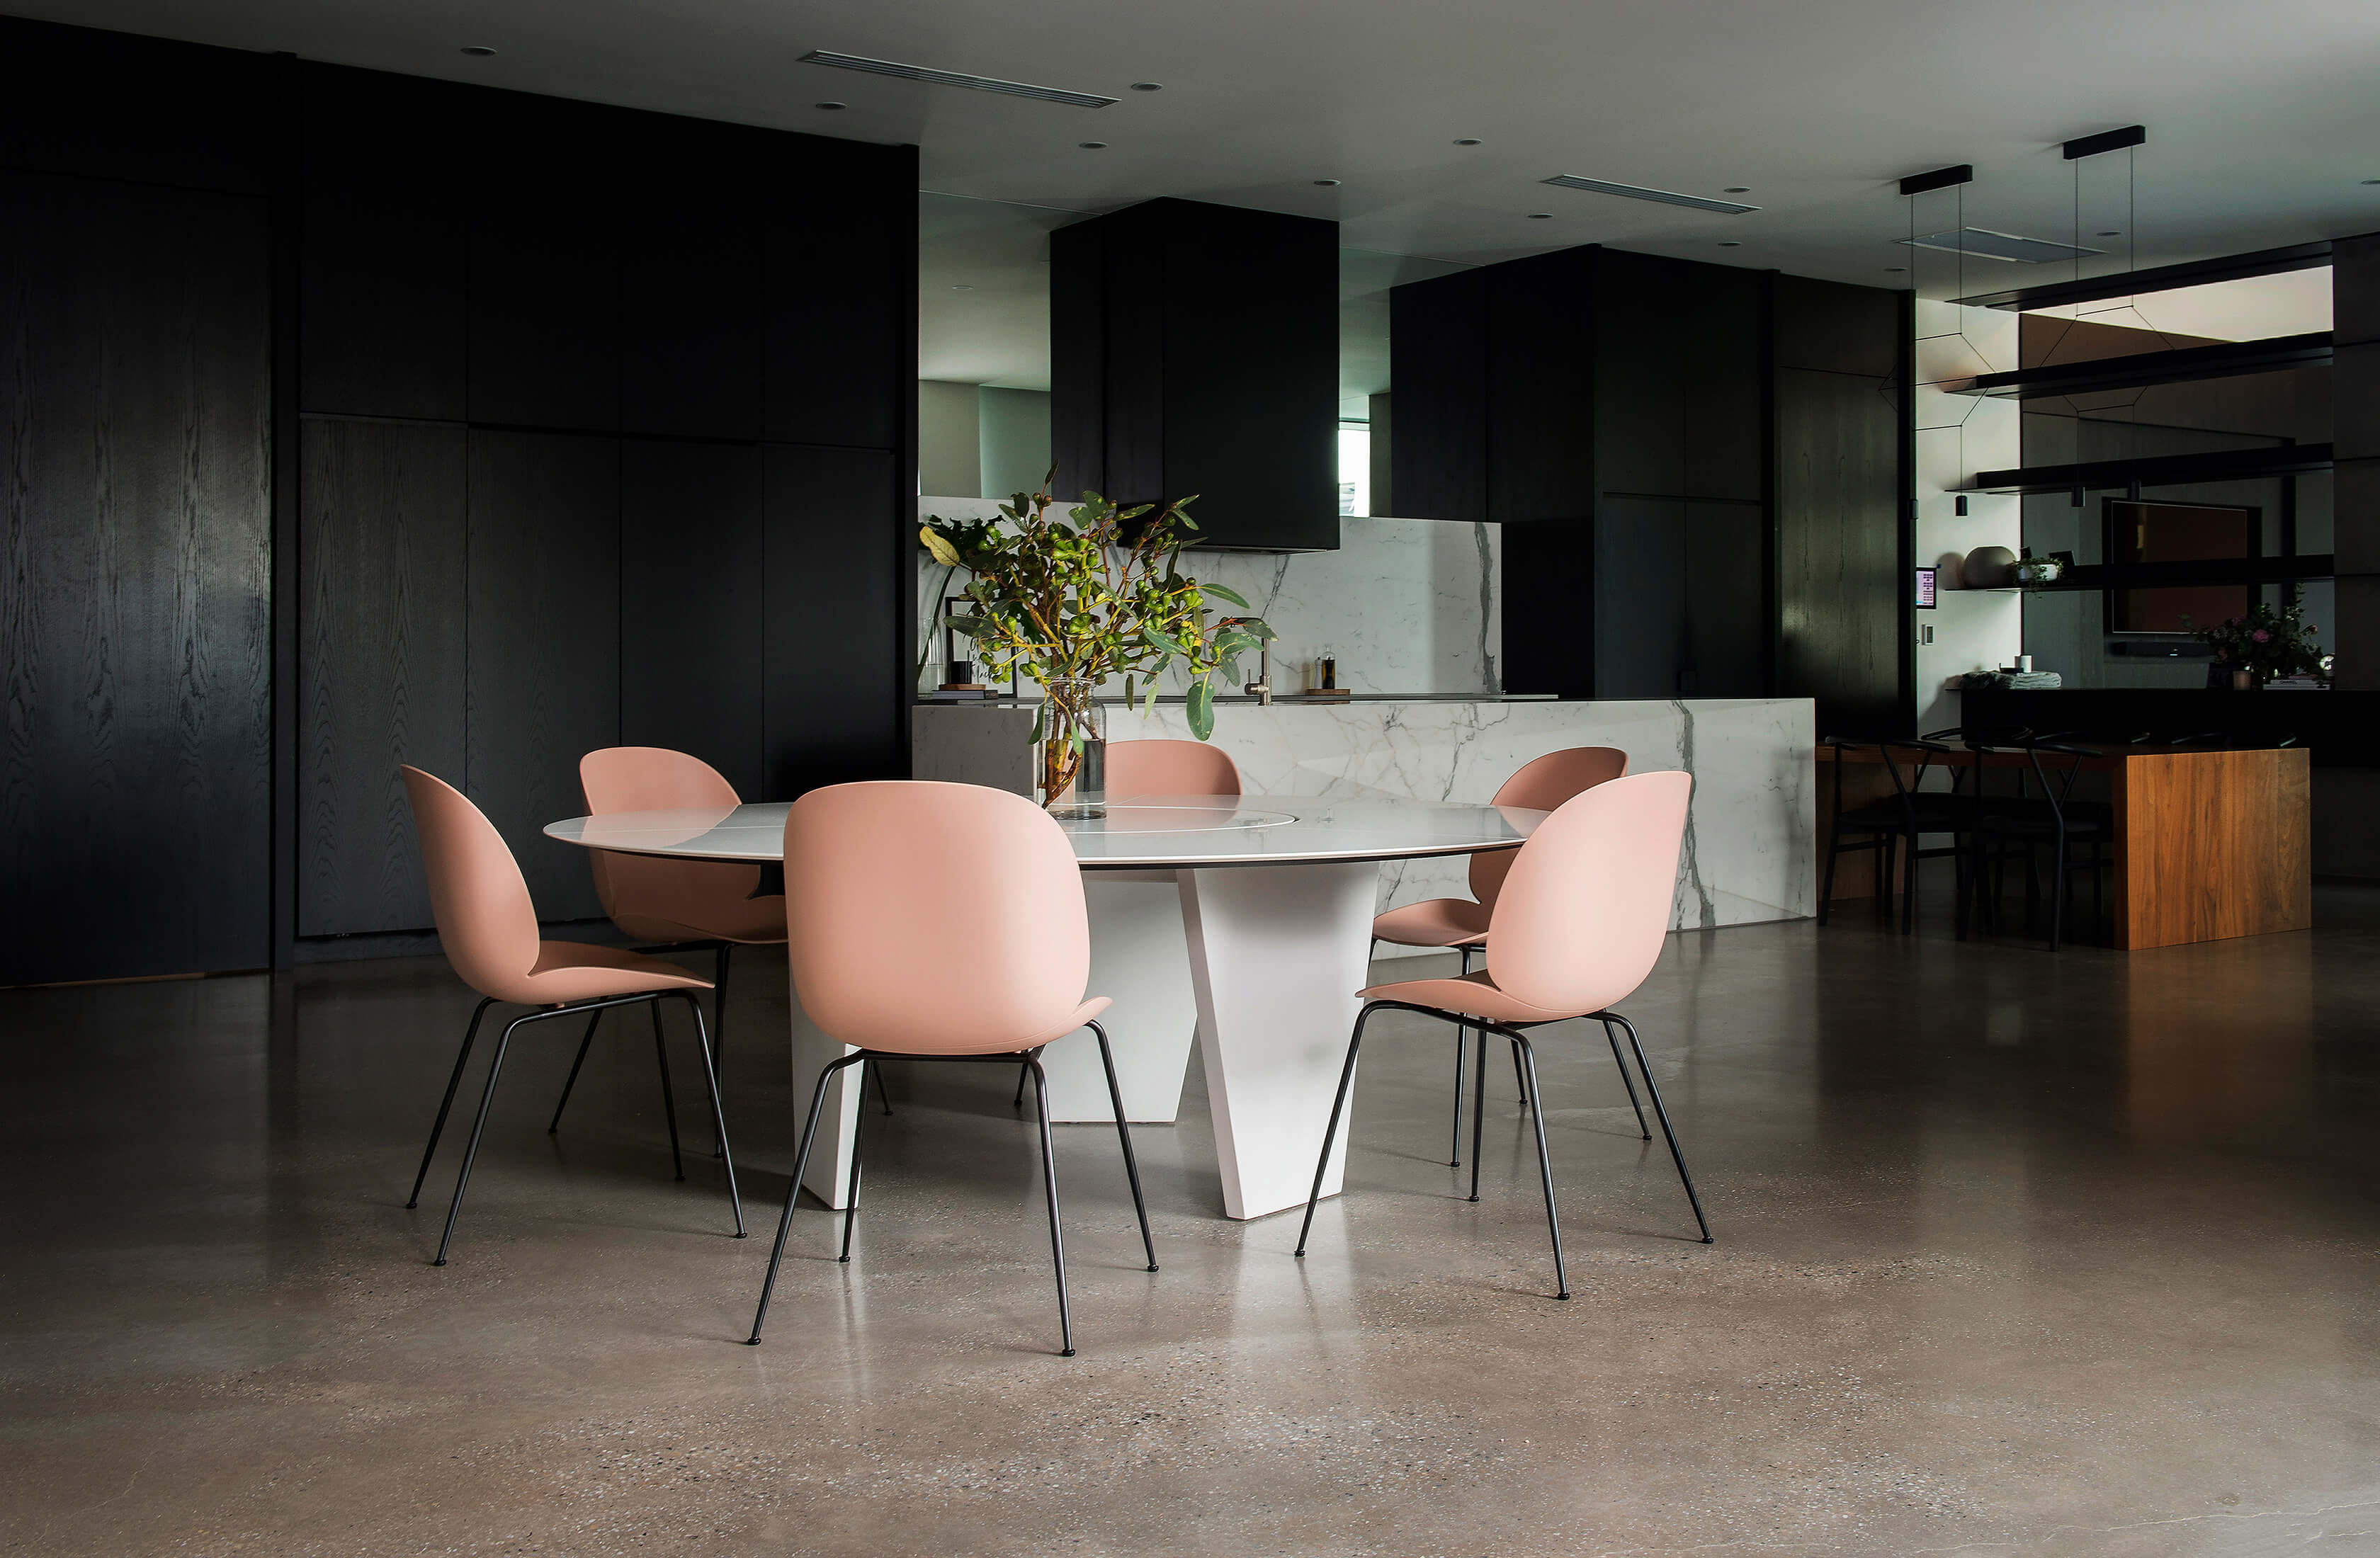 A moody kitchen backdrop sets the scene for the contrasting light white round designer dining table by Australian designer FrancoCrea to steal the show